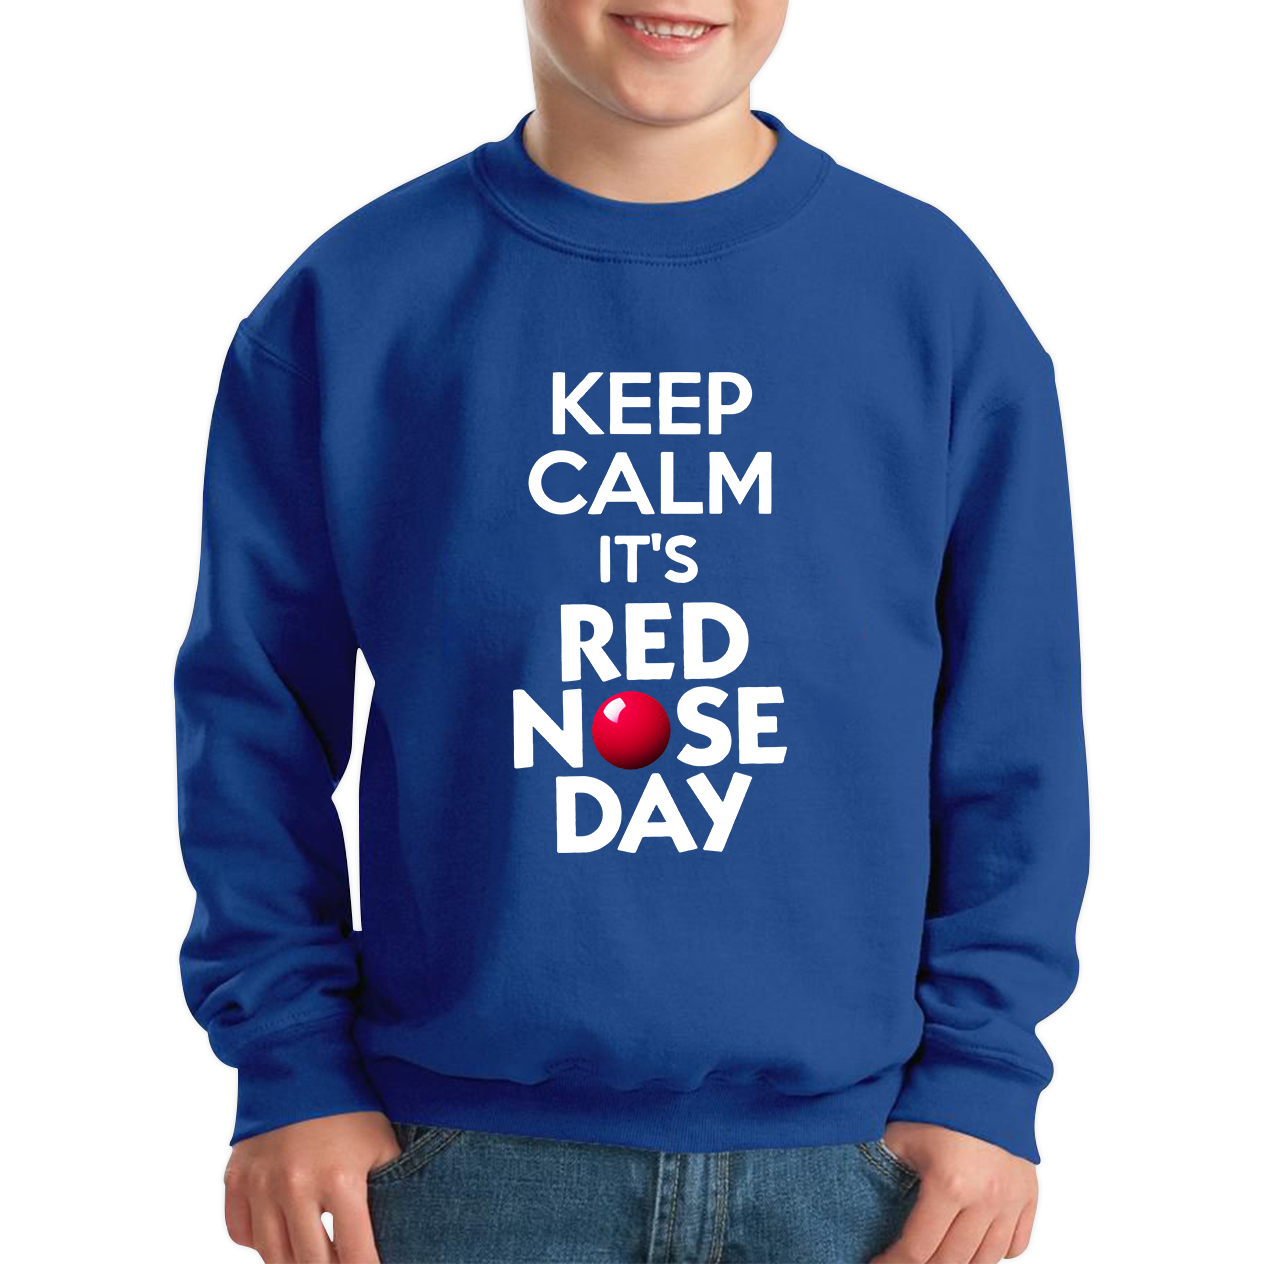 Keep Calm Its Red Nose Day Kids Sweatshirt. 50% Goes To Charity